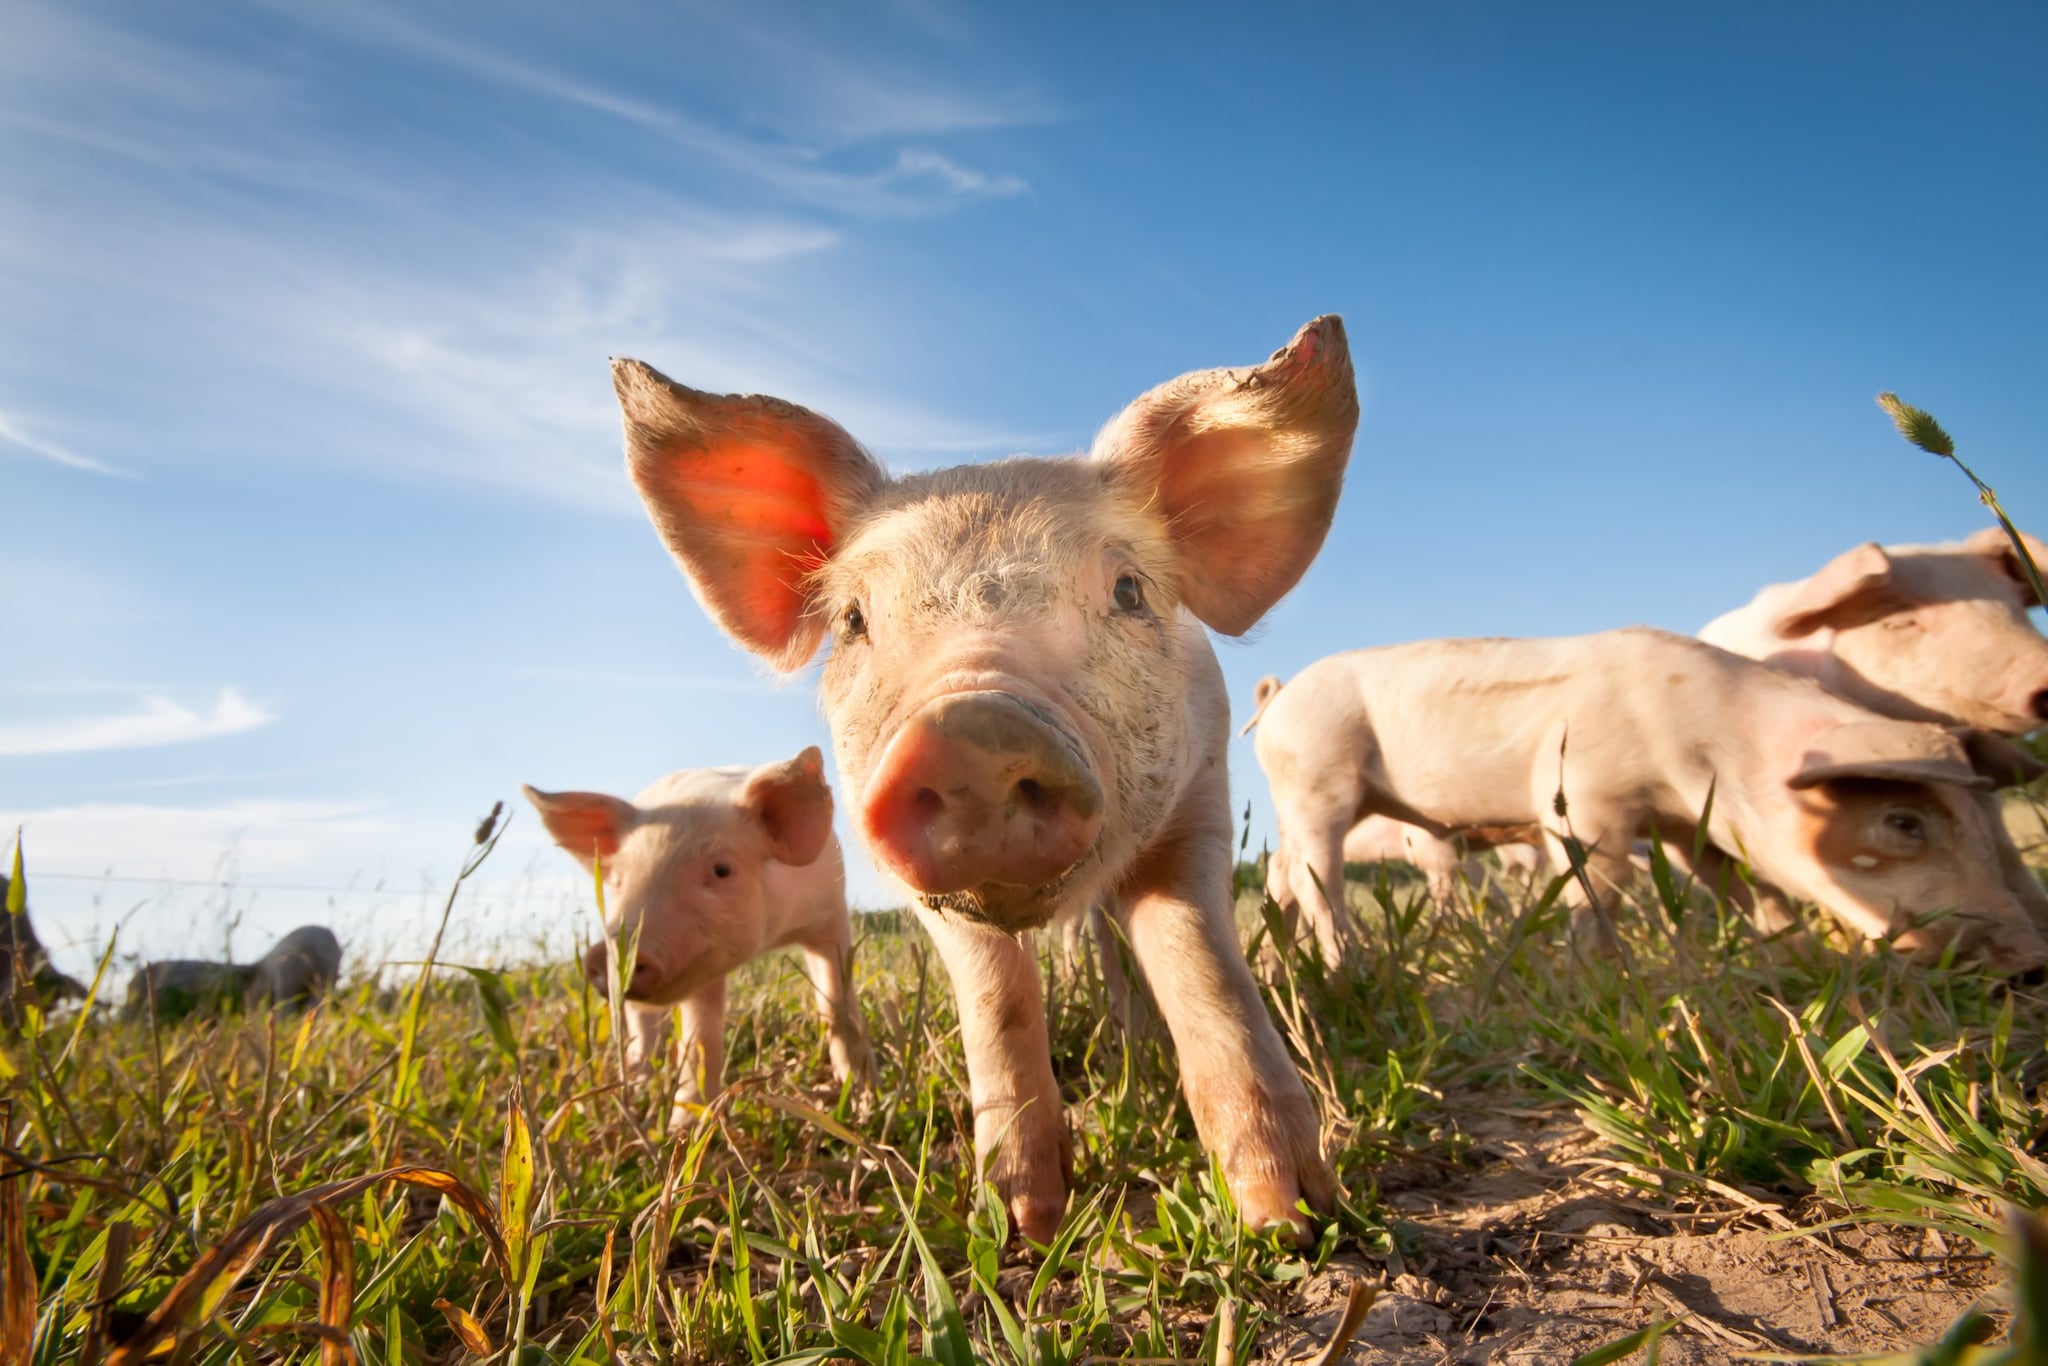 Several small pigs walking through a field